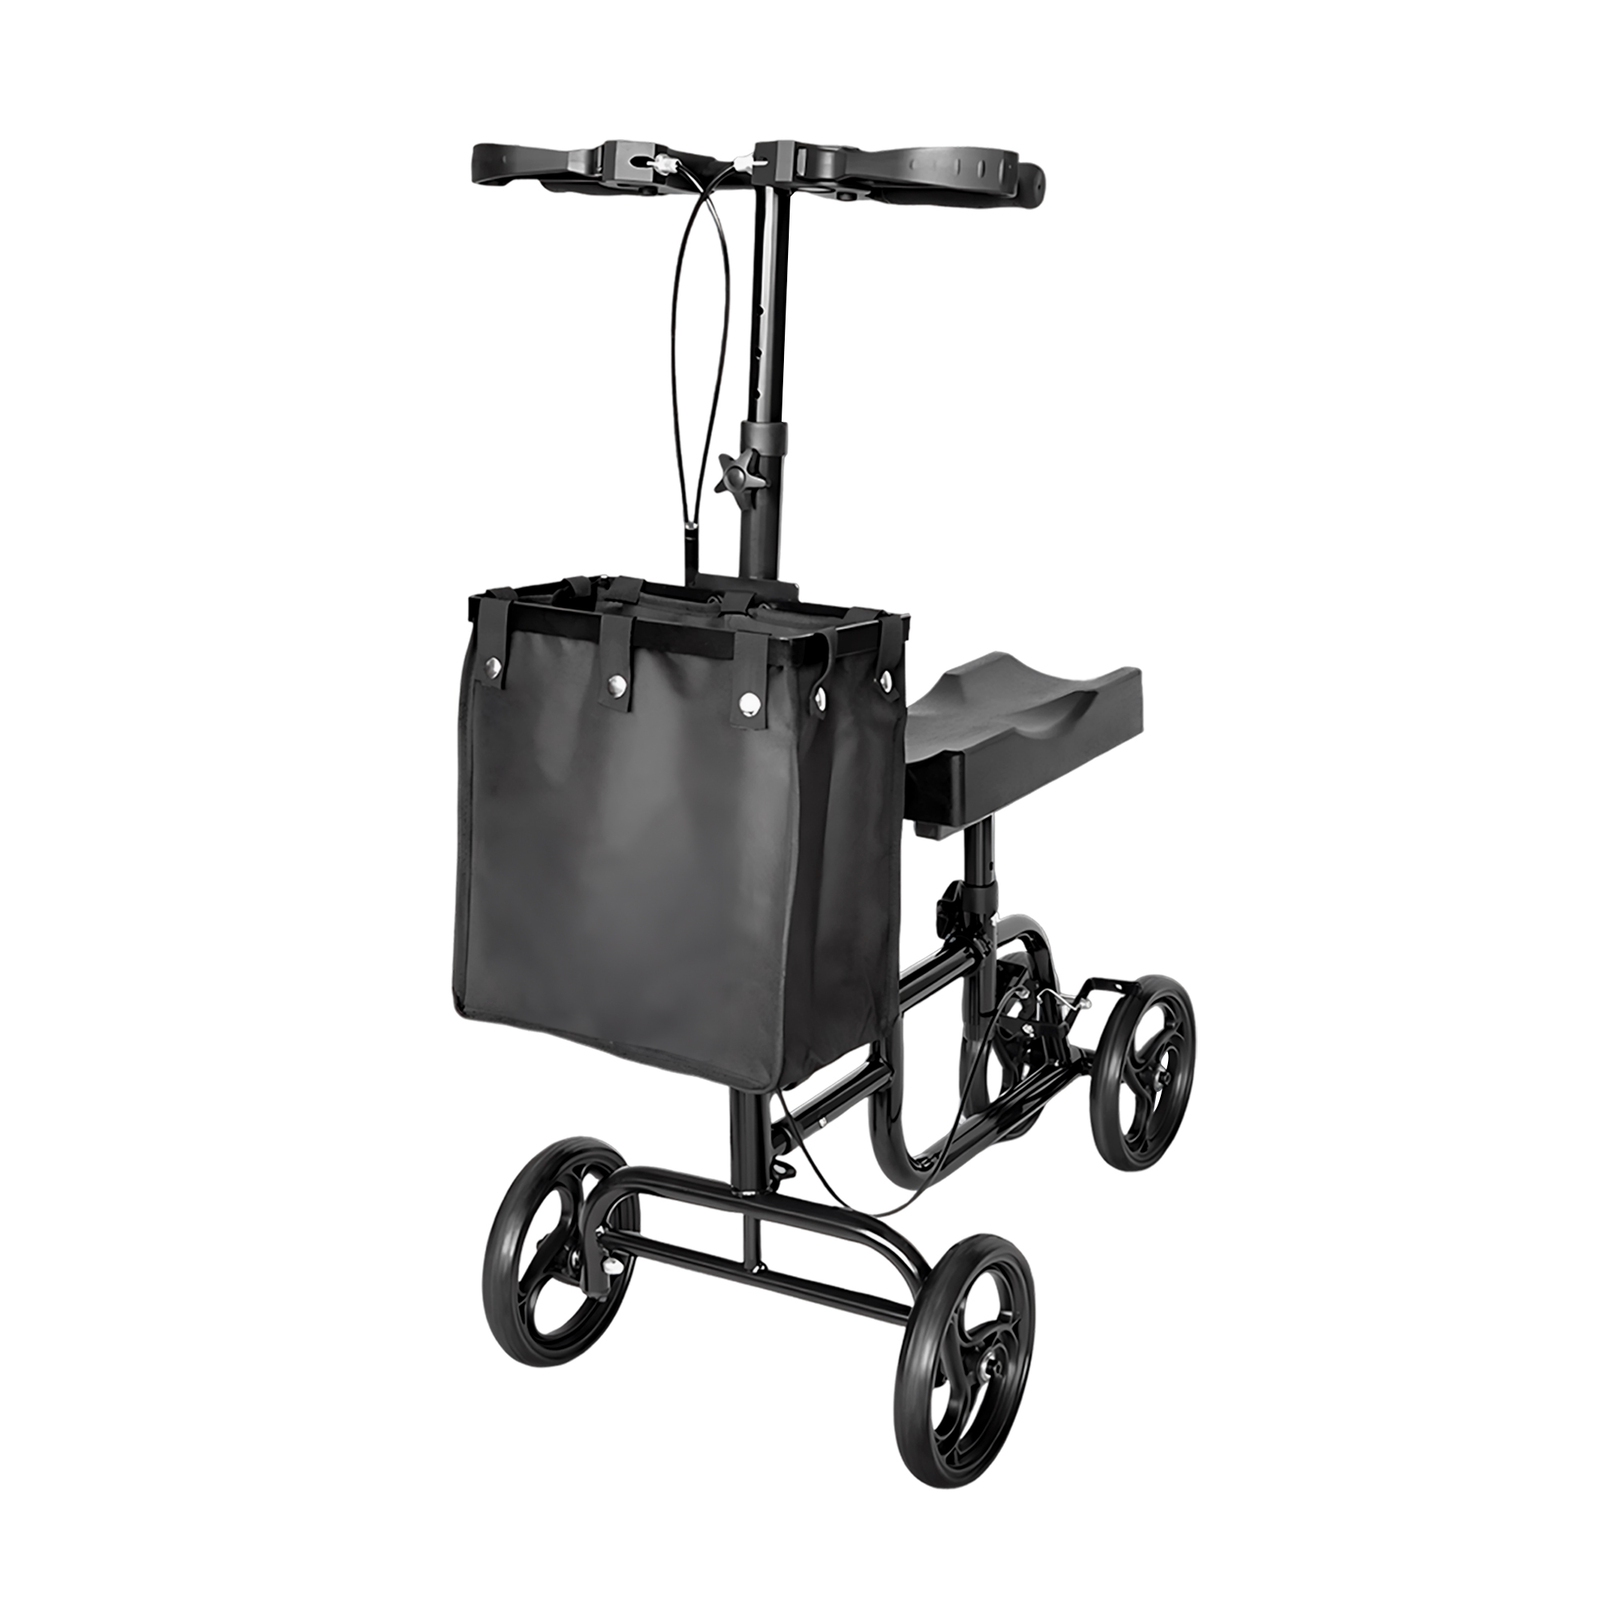 Knee Scooter Walker Mobility Walking Aid Foldable Alternative Crutches